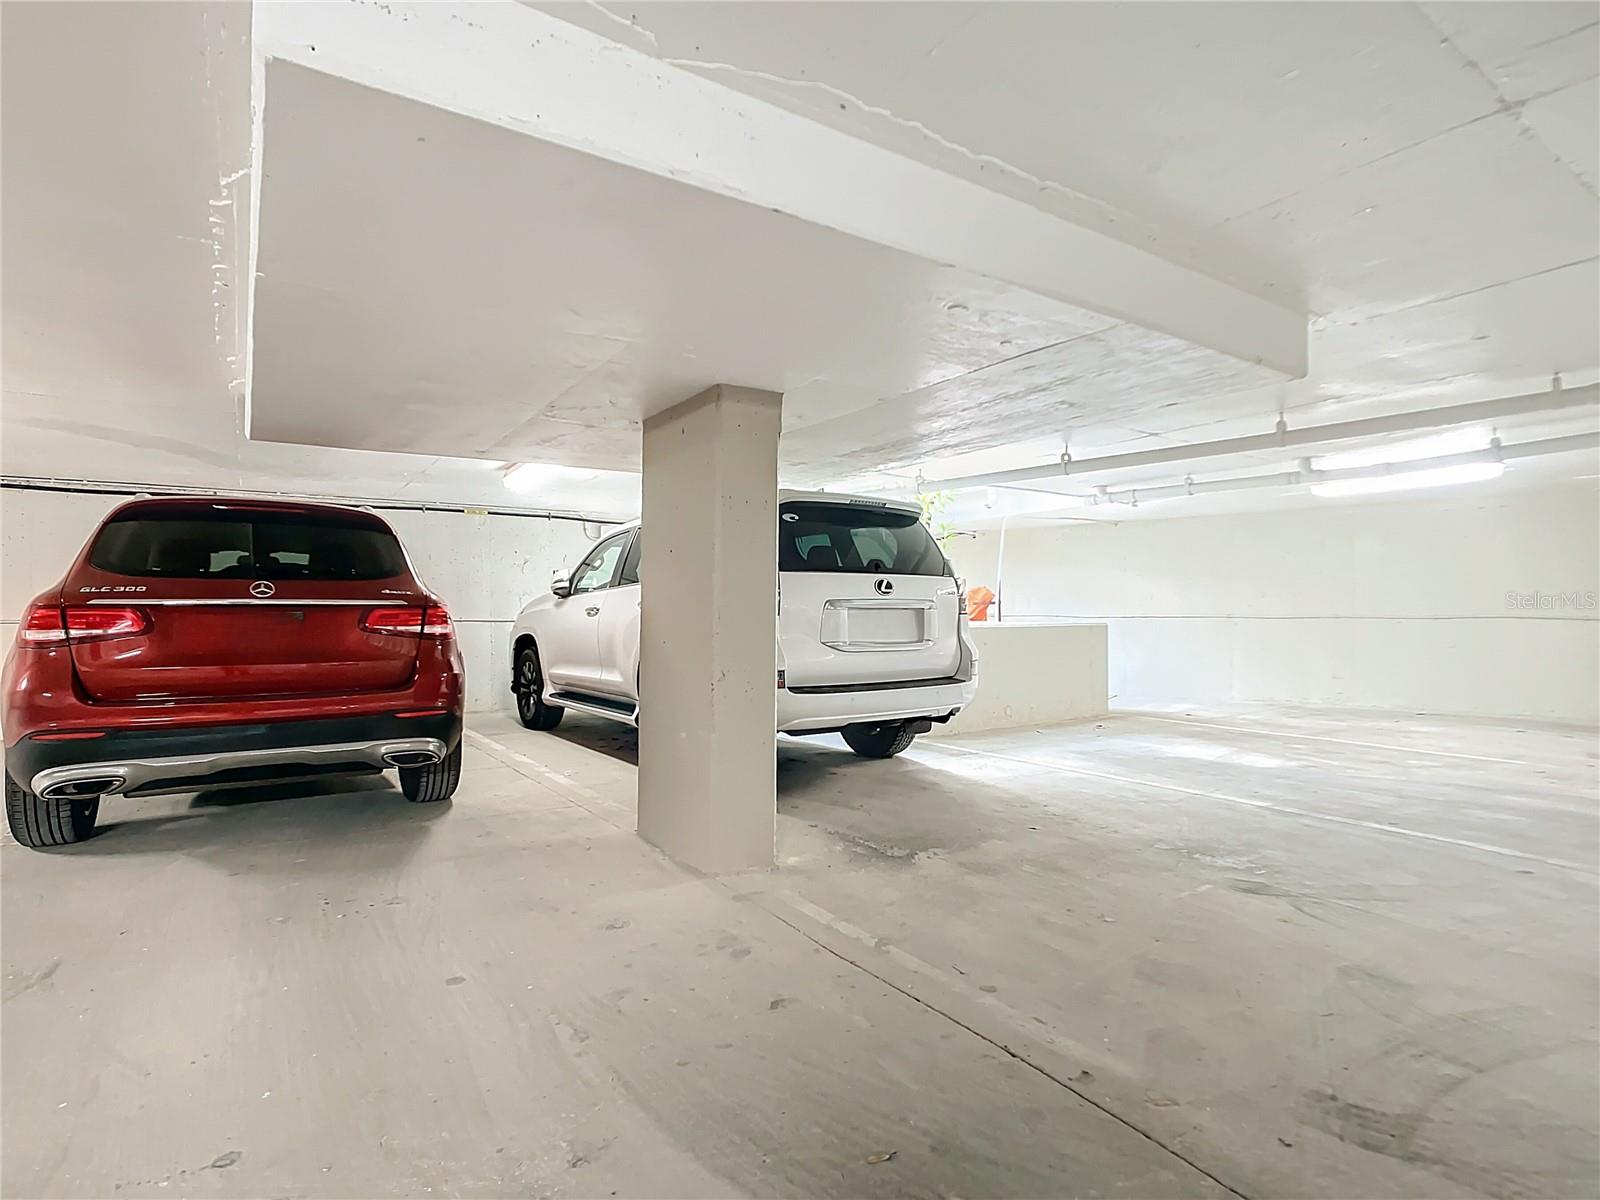 Designated Underbuilding Oversized Tandem Parking Space #115 Can Fit 2 Small Cars or Car and Golf Cart